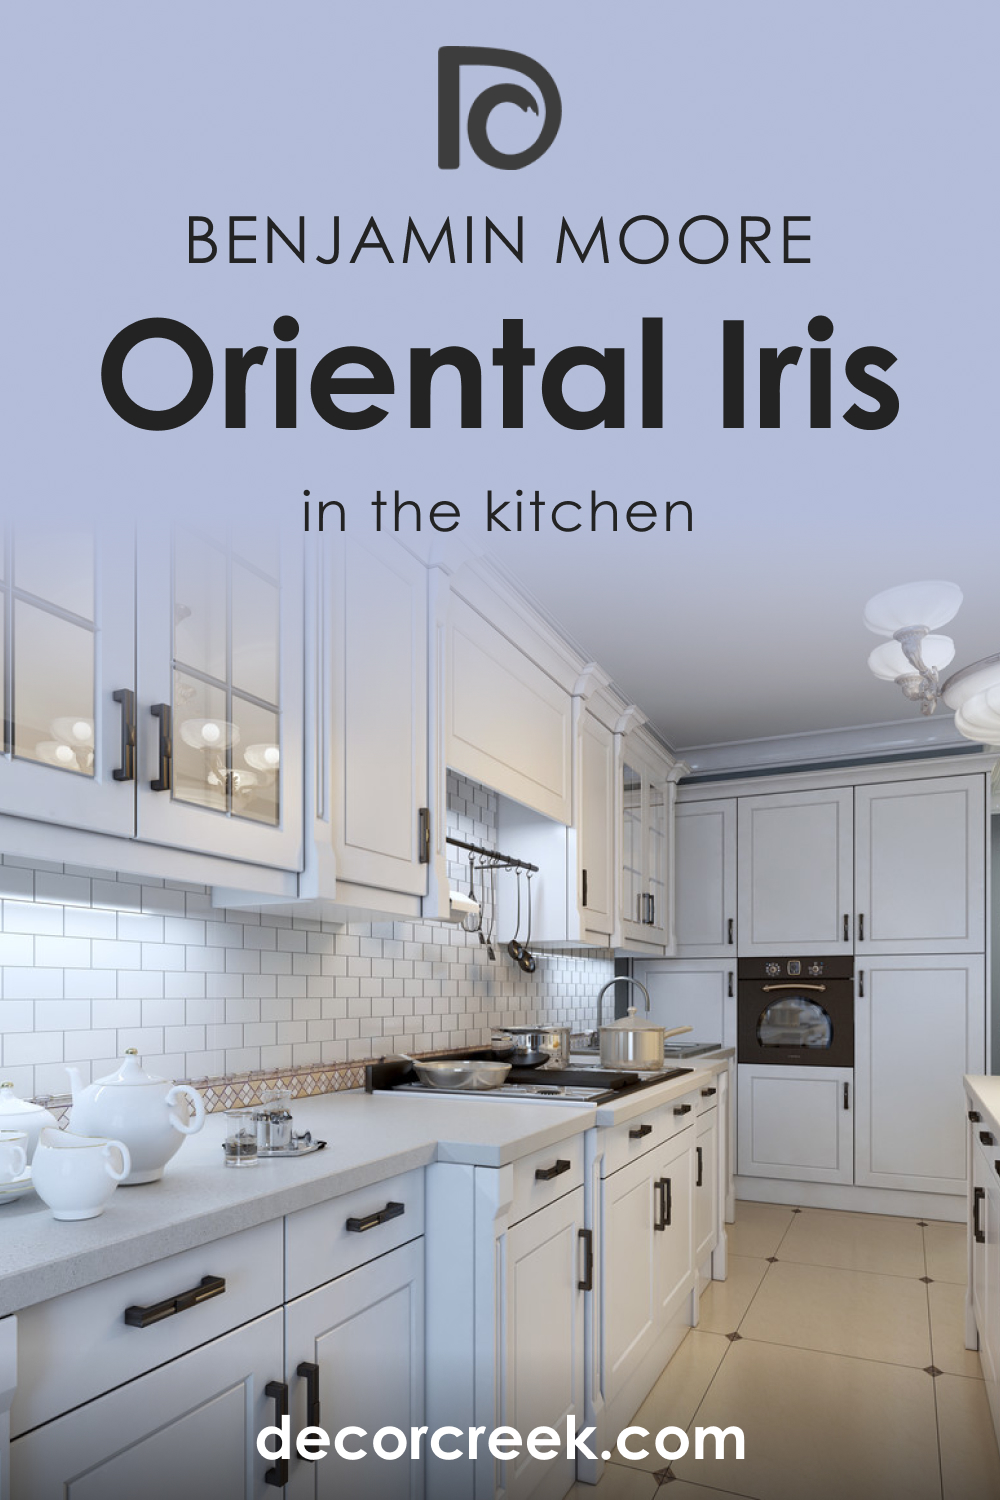 How to Use Oriental Iris 1418 in the Kitchen?